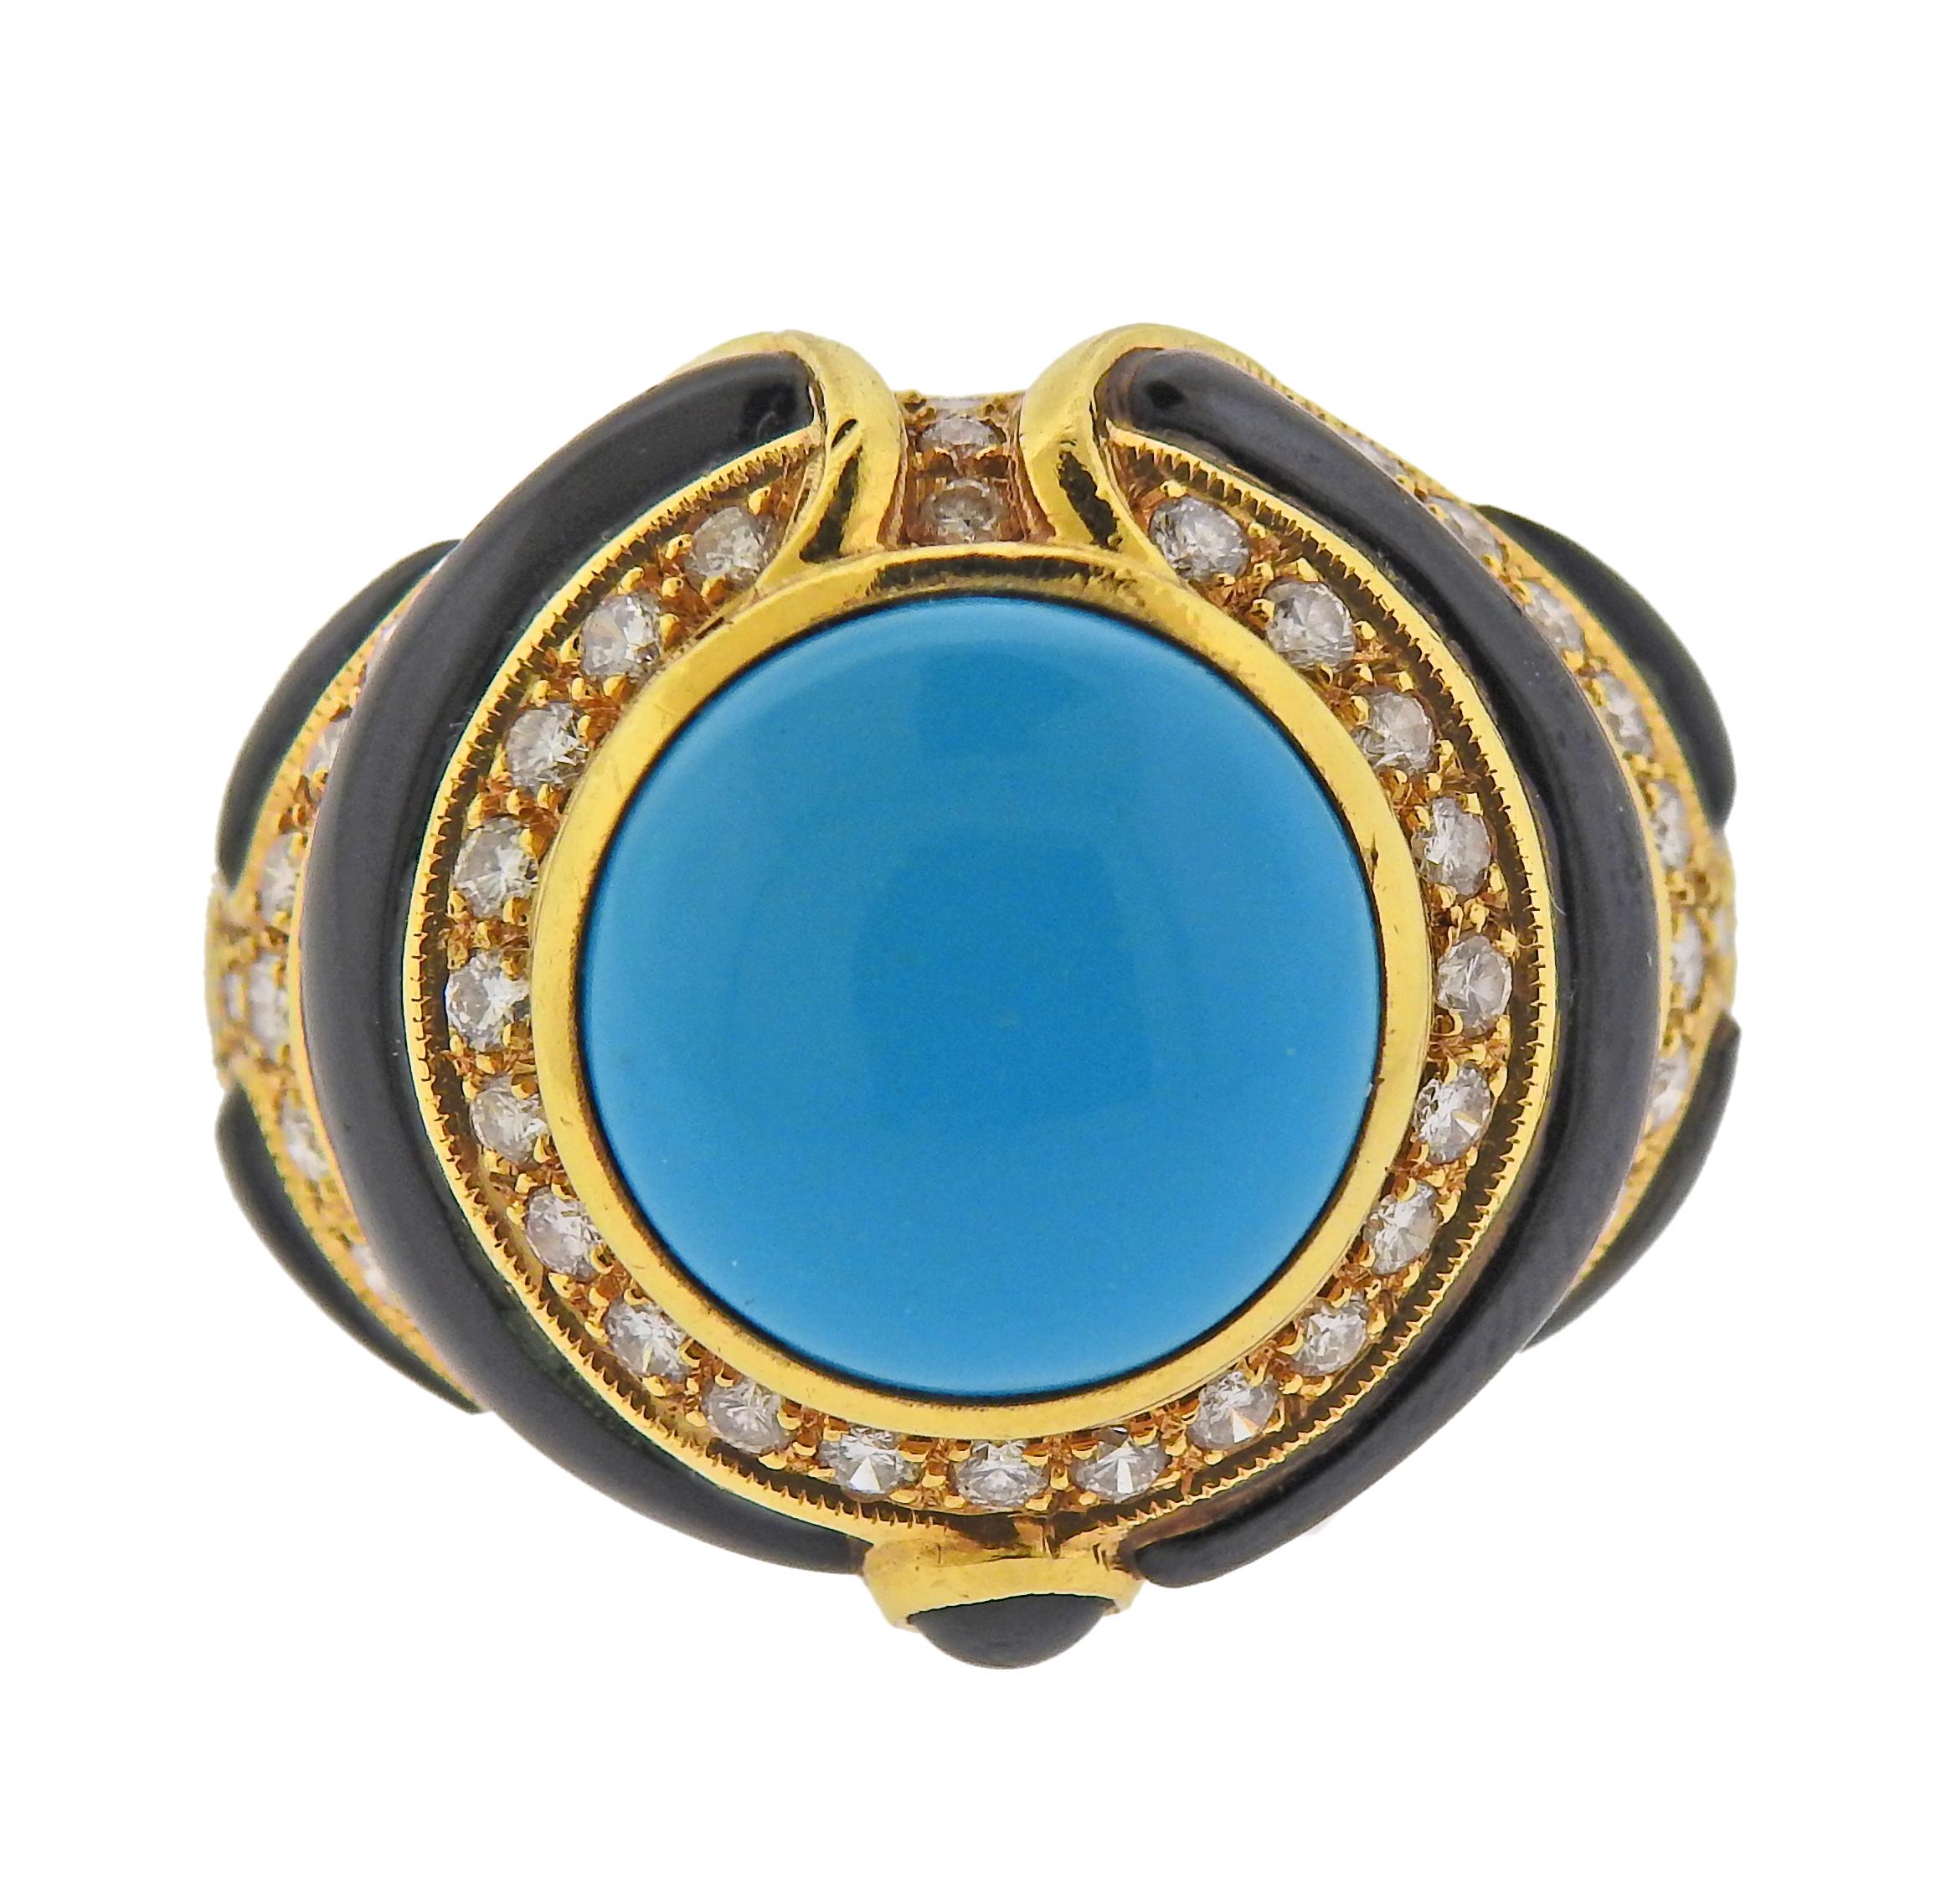 18k gold cocktail ring, with onyx, turquoise and approx. 0.90ctw in diamonds. Ring size - 10 (has a sizing bar). Ring top - 22mm wide. Marked: 750. Weight - 18.3 grams.